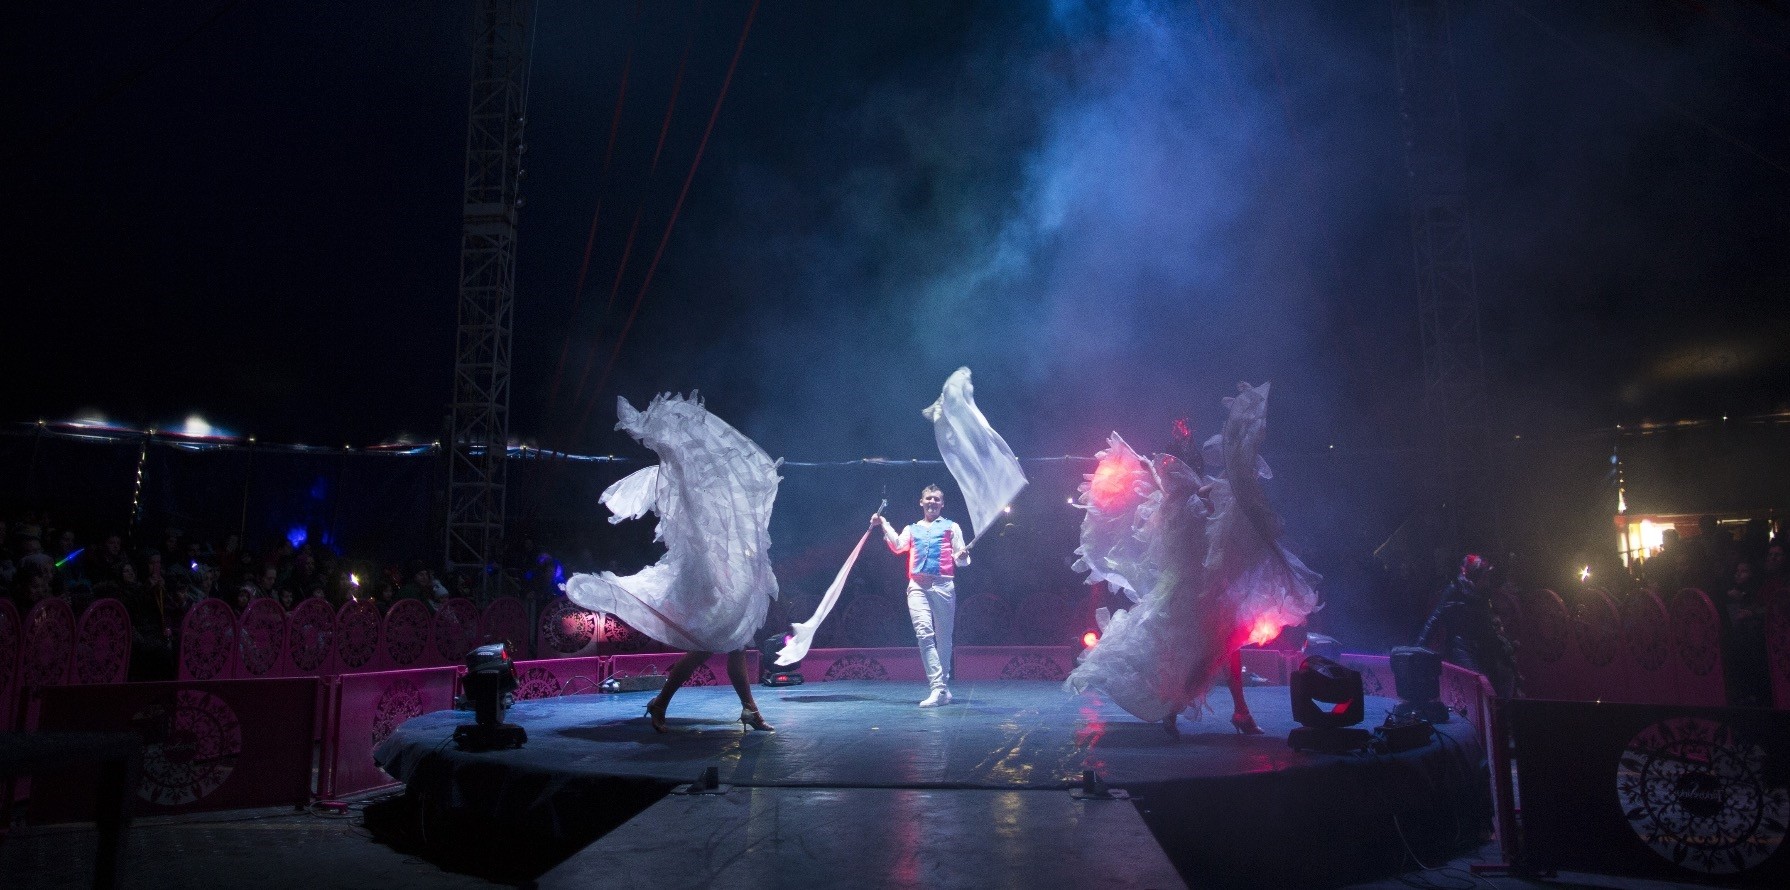 Turkeyu2019s one and only circus which is managed by the Cankurt Family, does not use animals in their shows.